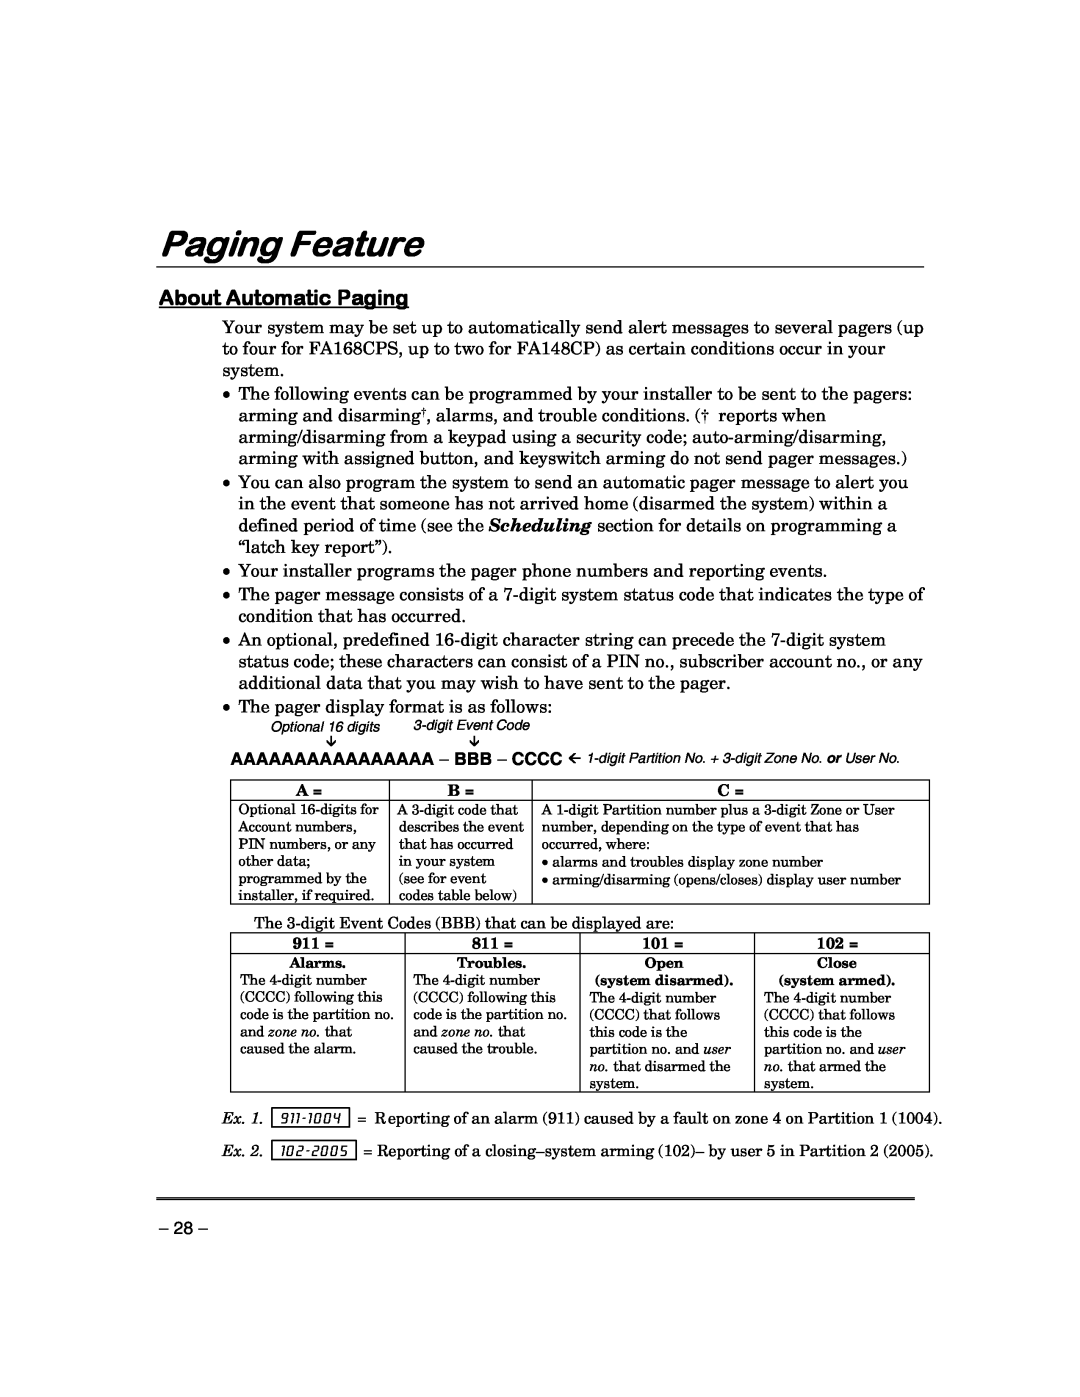 First Alert FA148CPSIA, FA168CPSSIA manual Paging Feature, About Automatic Paging 